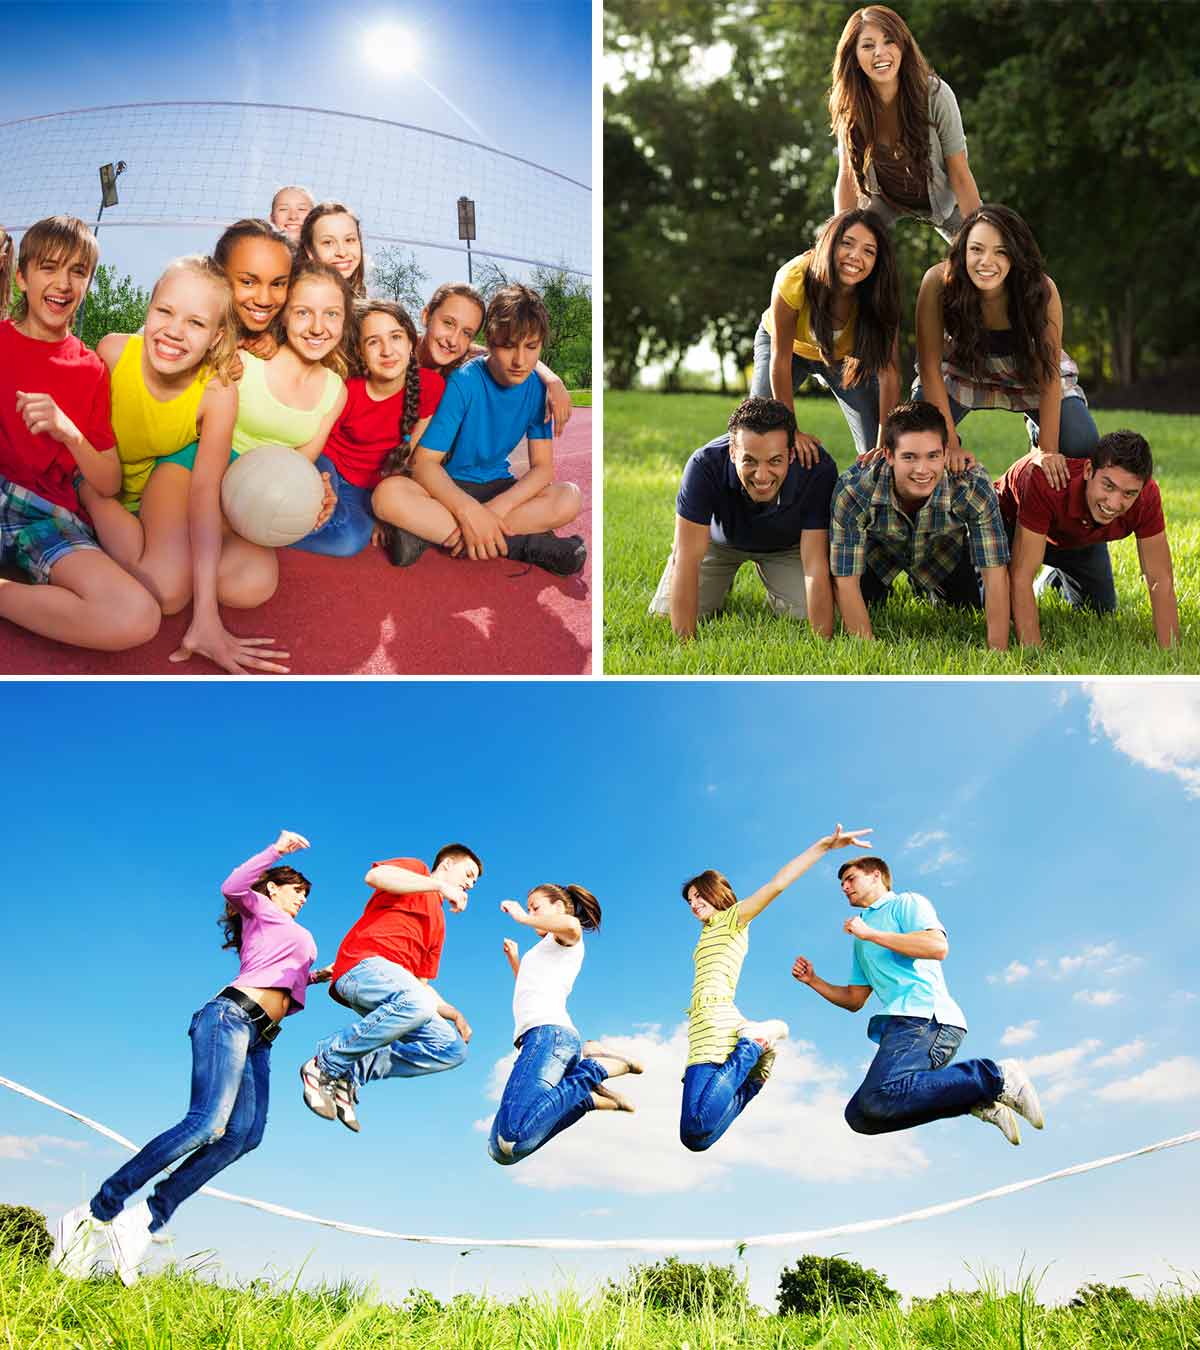 27 Fun Team Building Games And Activities For Teenagers